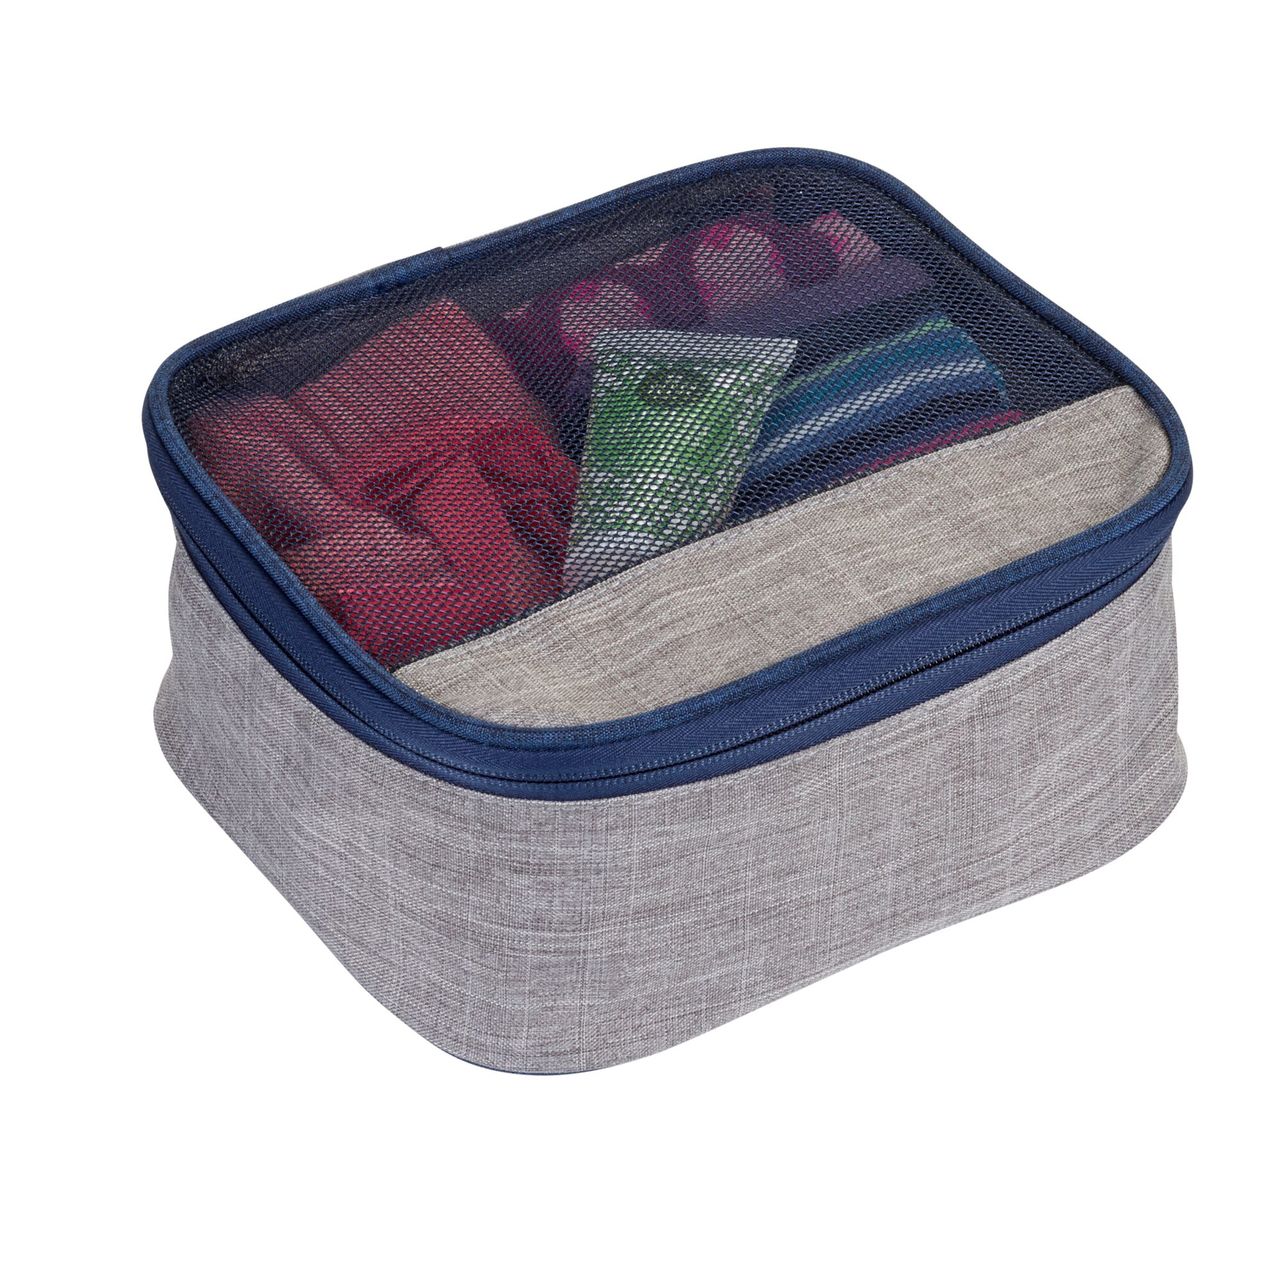 Lewis N. Clark Upright Packing Cube Set (3 Pack)